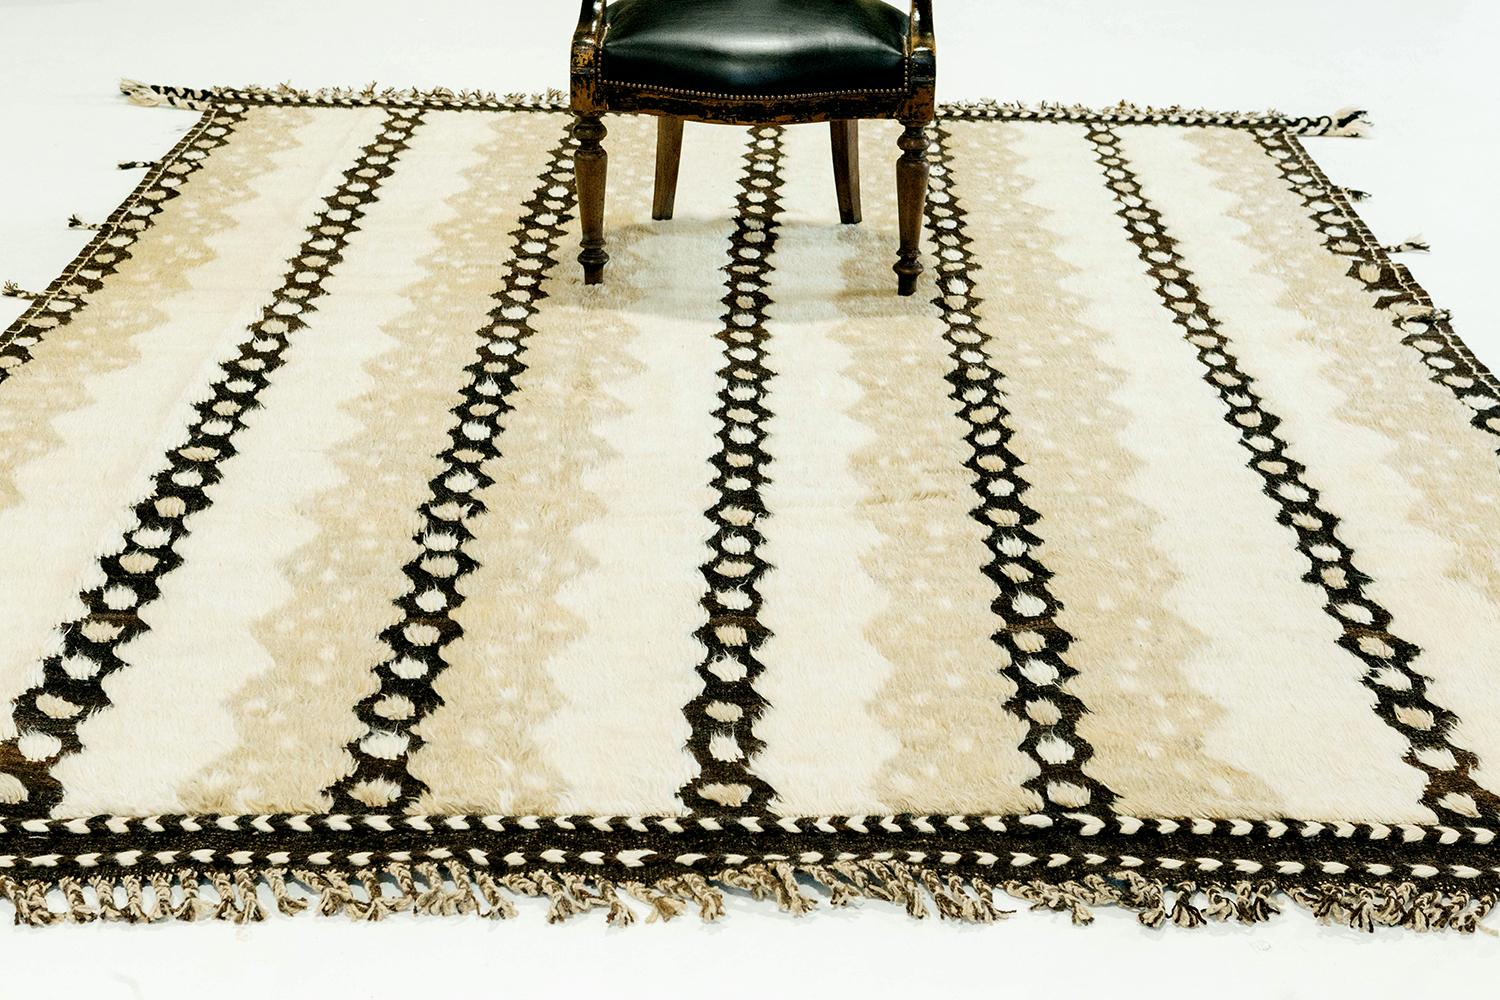 The 'Modlina' rug is a handwoven wool piece inspired by vintage Scandinavian design elements and recreated for the modern design world. The rug's shag balance and harmony, hand woven with a black flat weave and piles of taupe and ivory. This